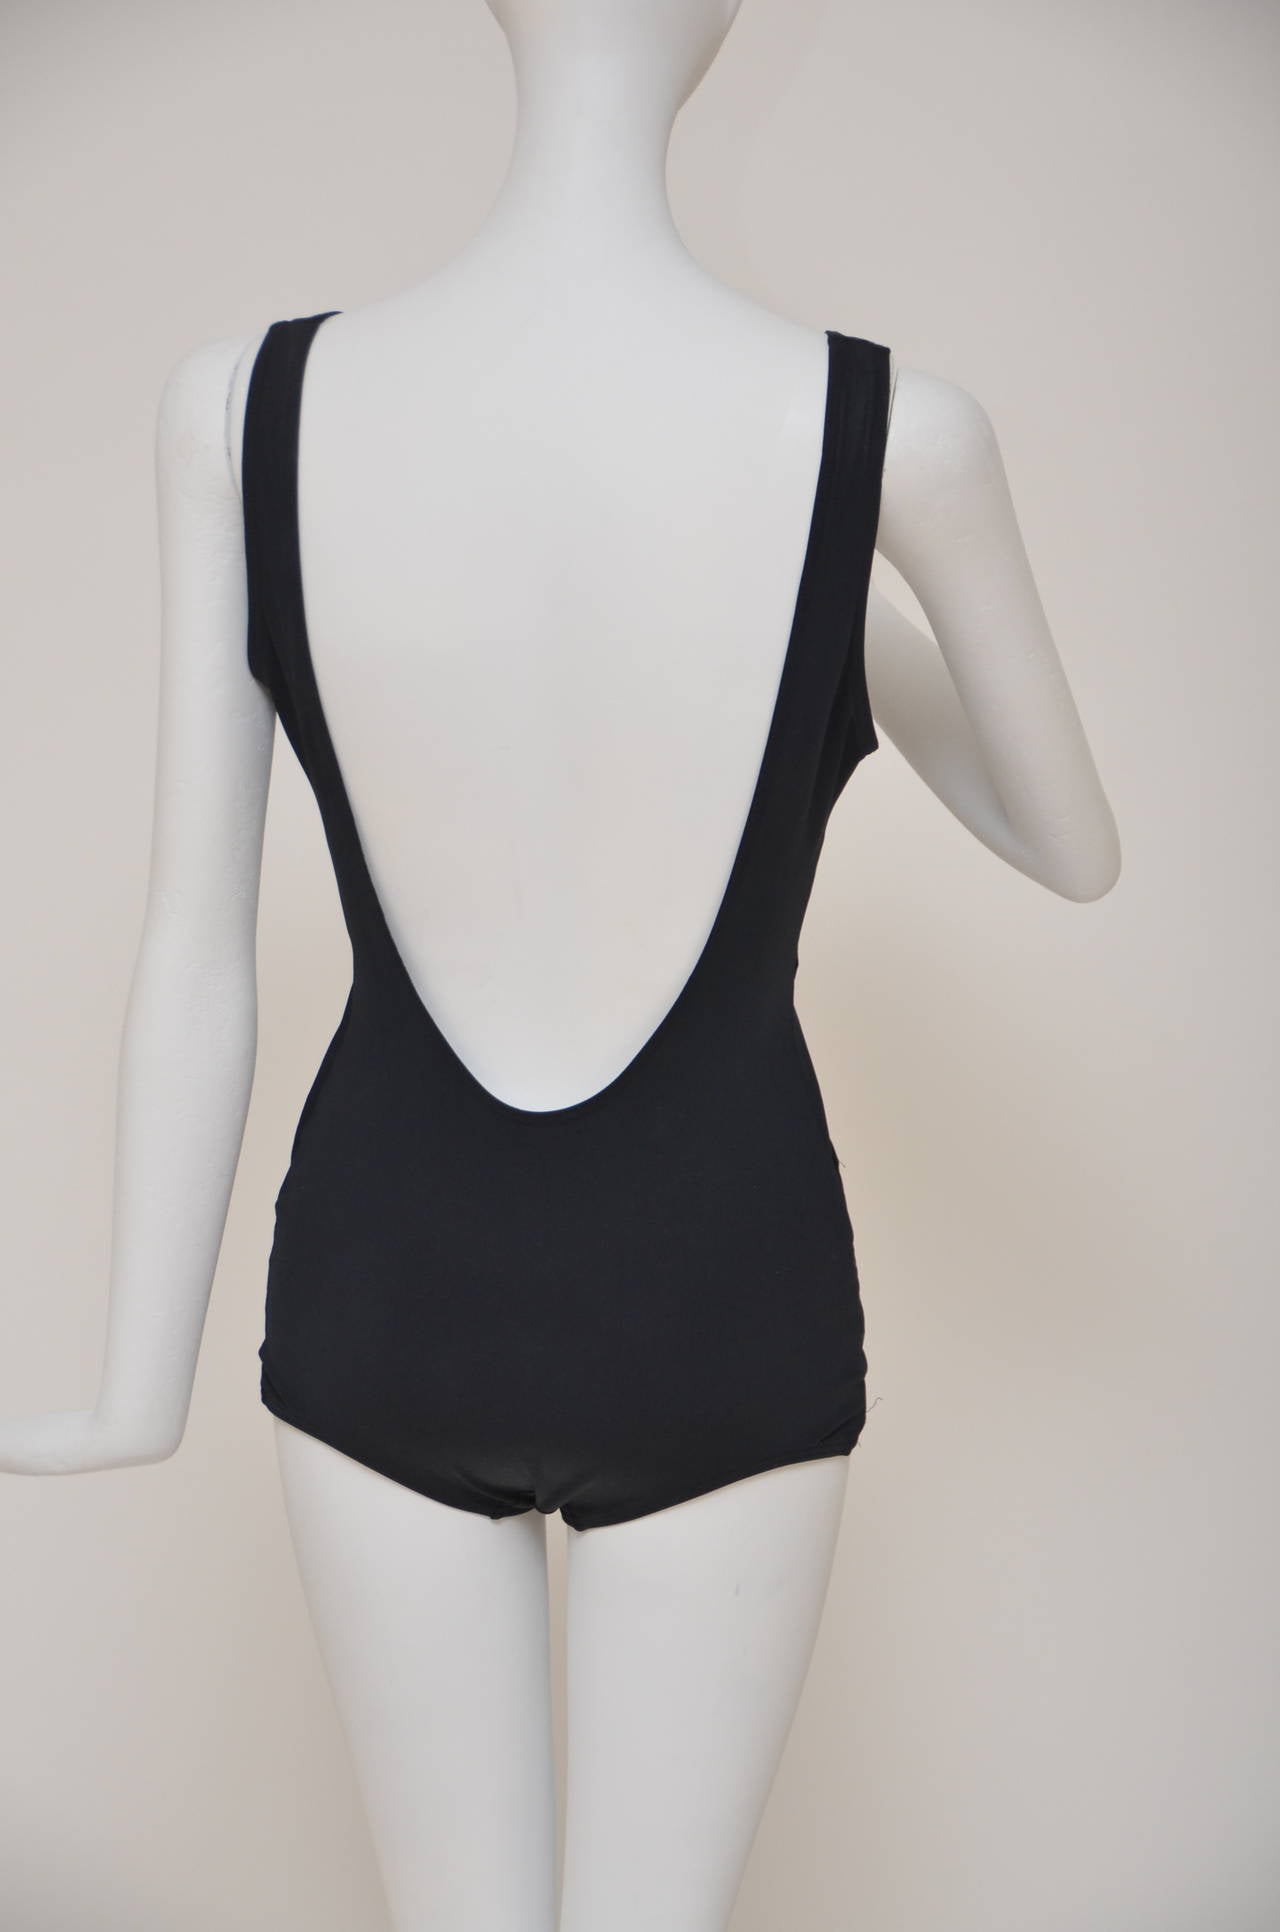 chanel vintage one piece swimsuit